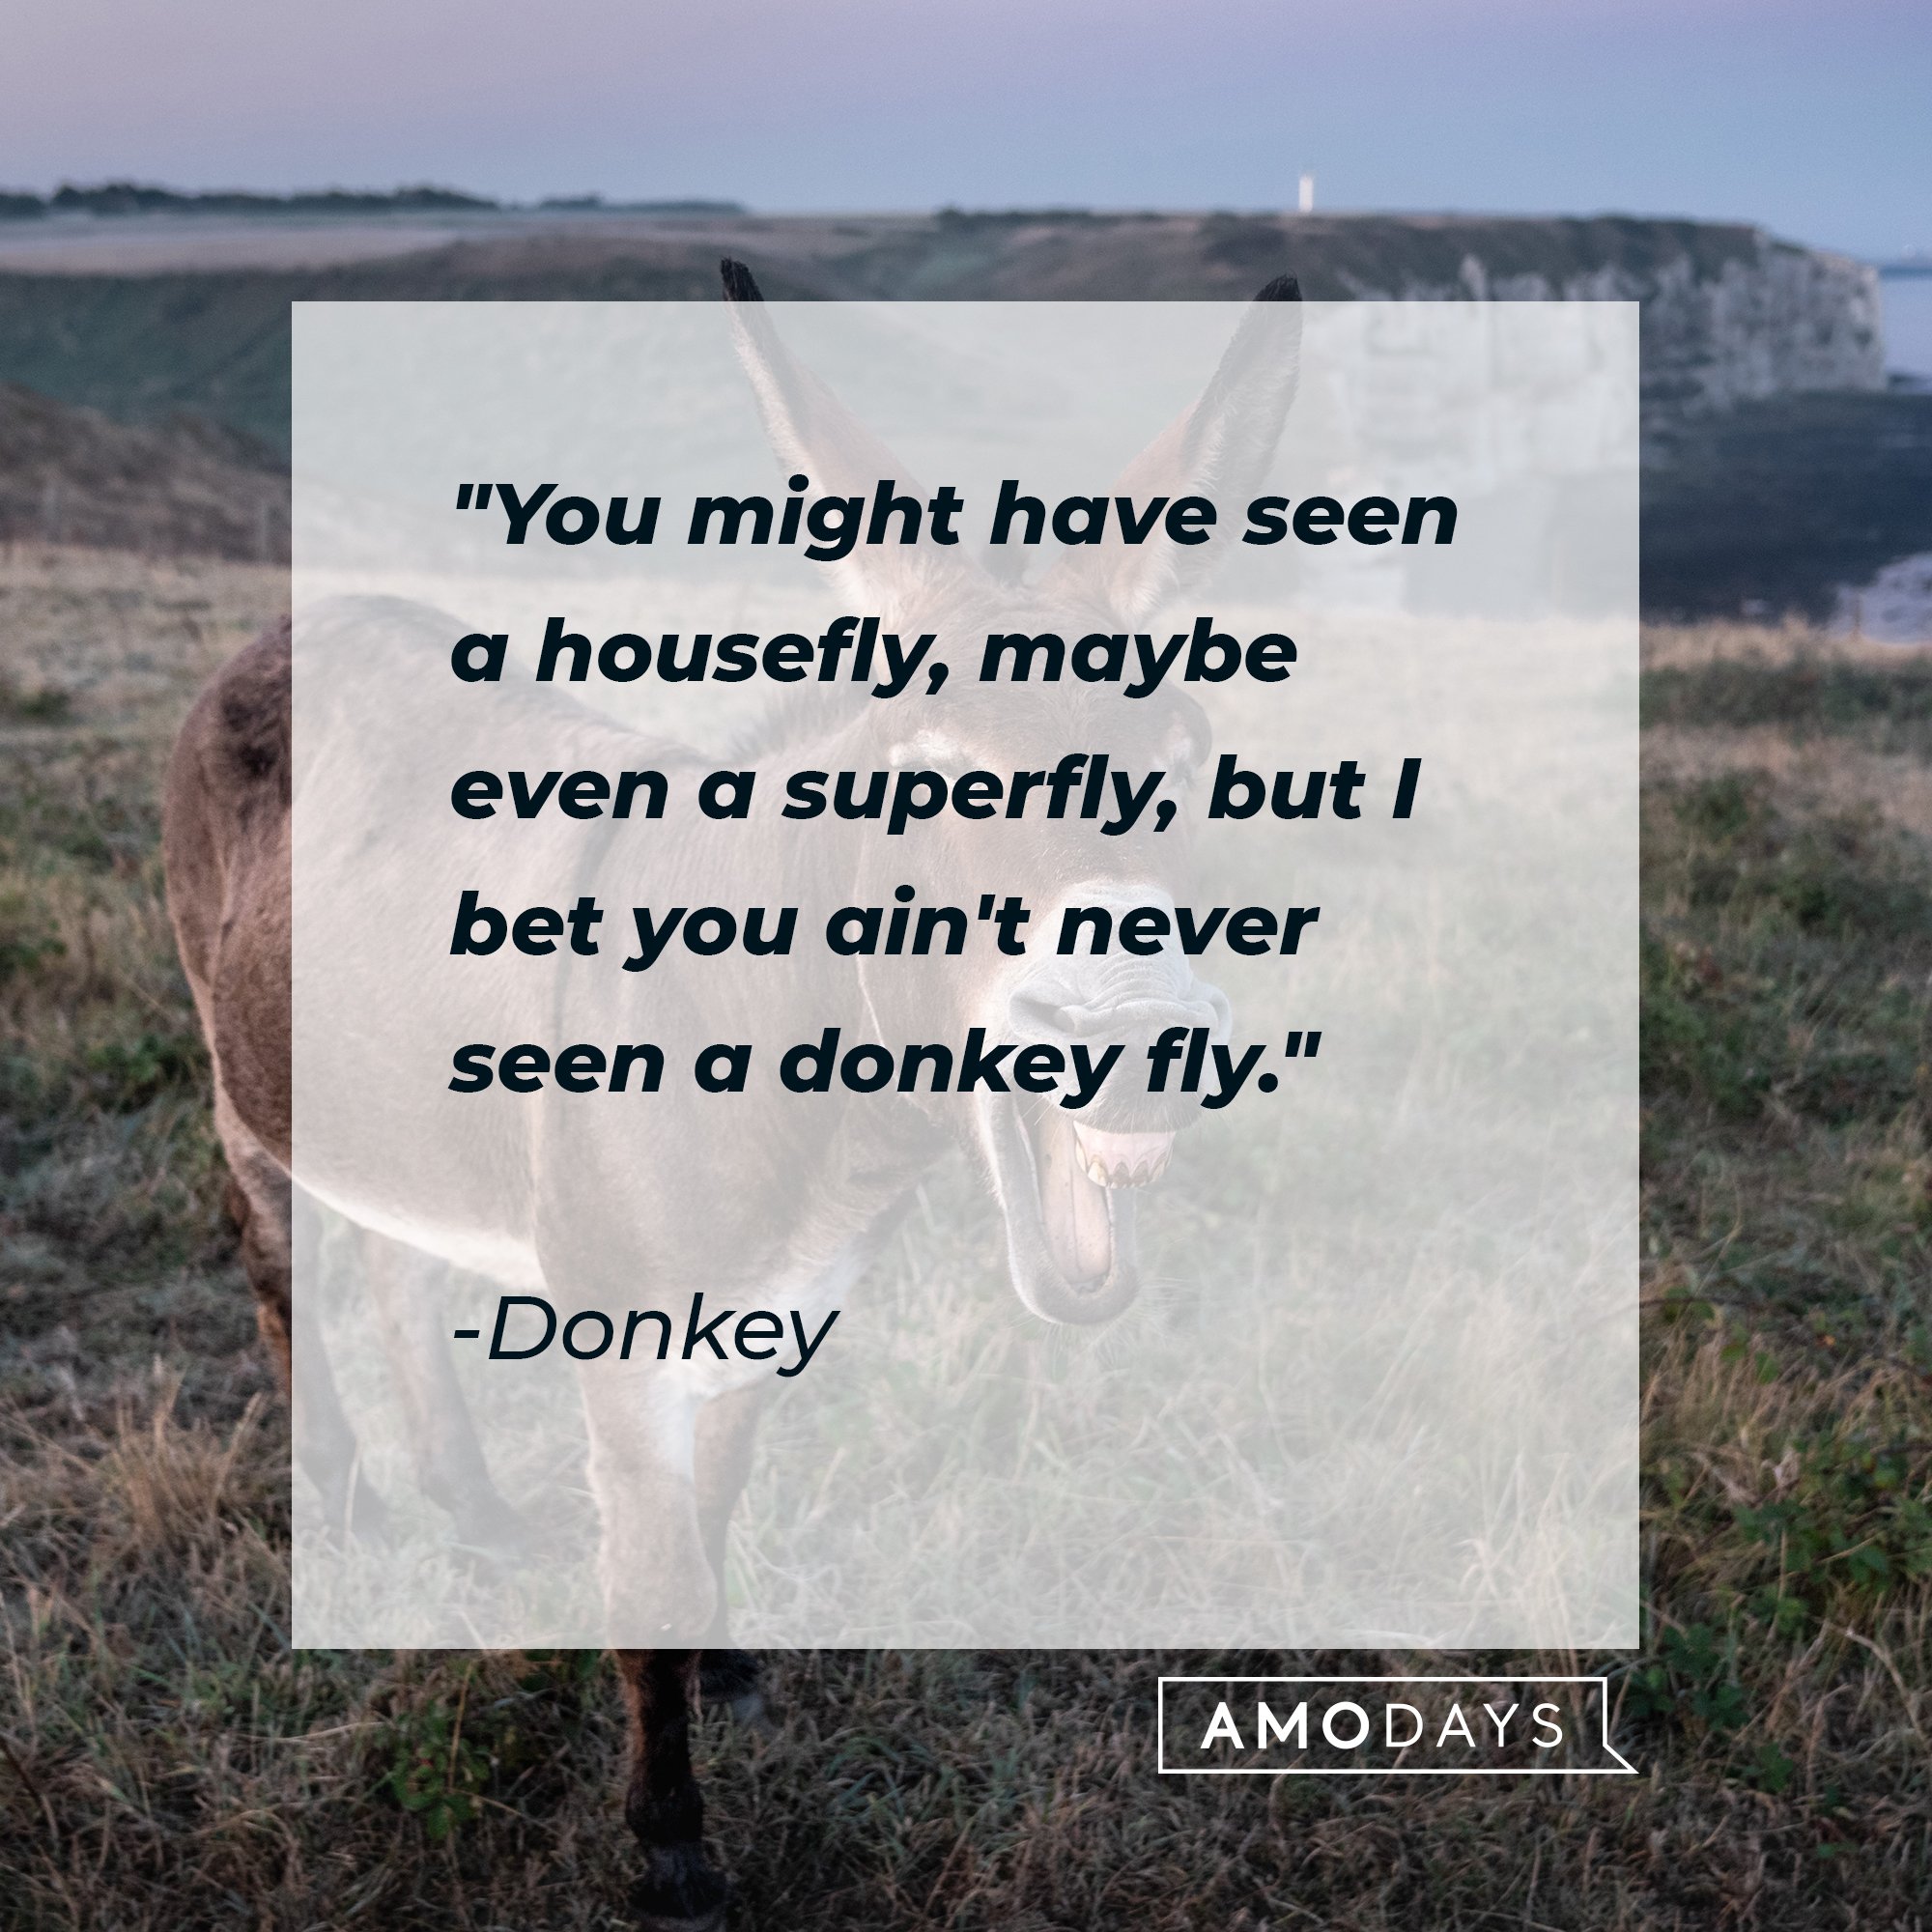 Donkey's quote: "You might have seen a housefly, maybe even a superfly, but I bet you ain't never seen a donkey fly." | Image: AmoDays